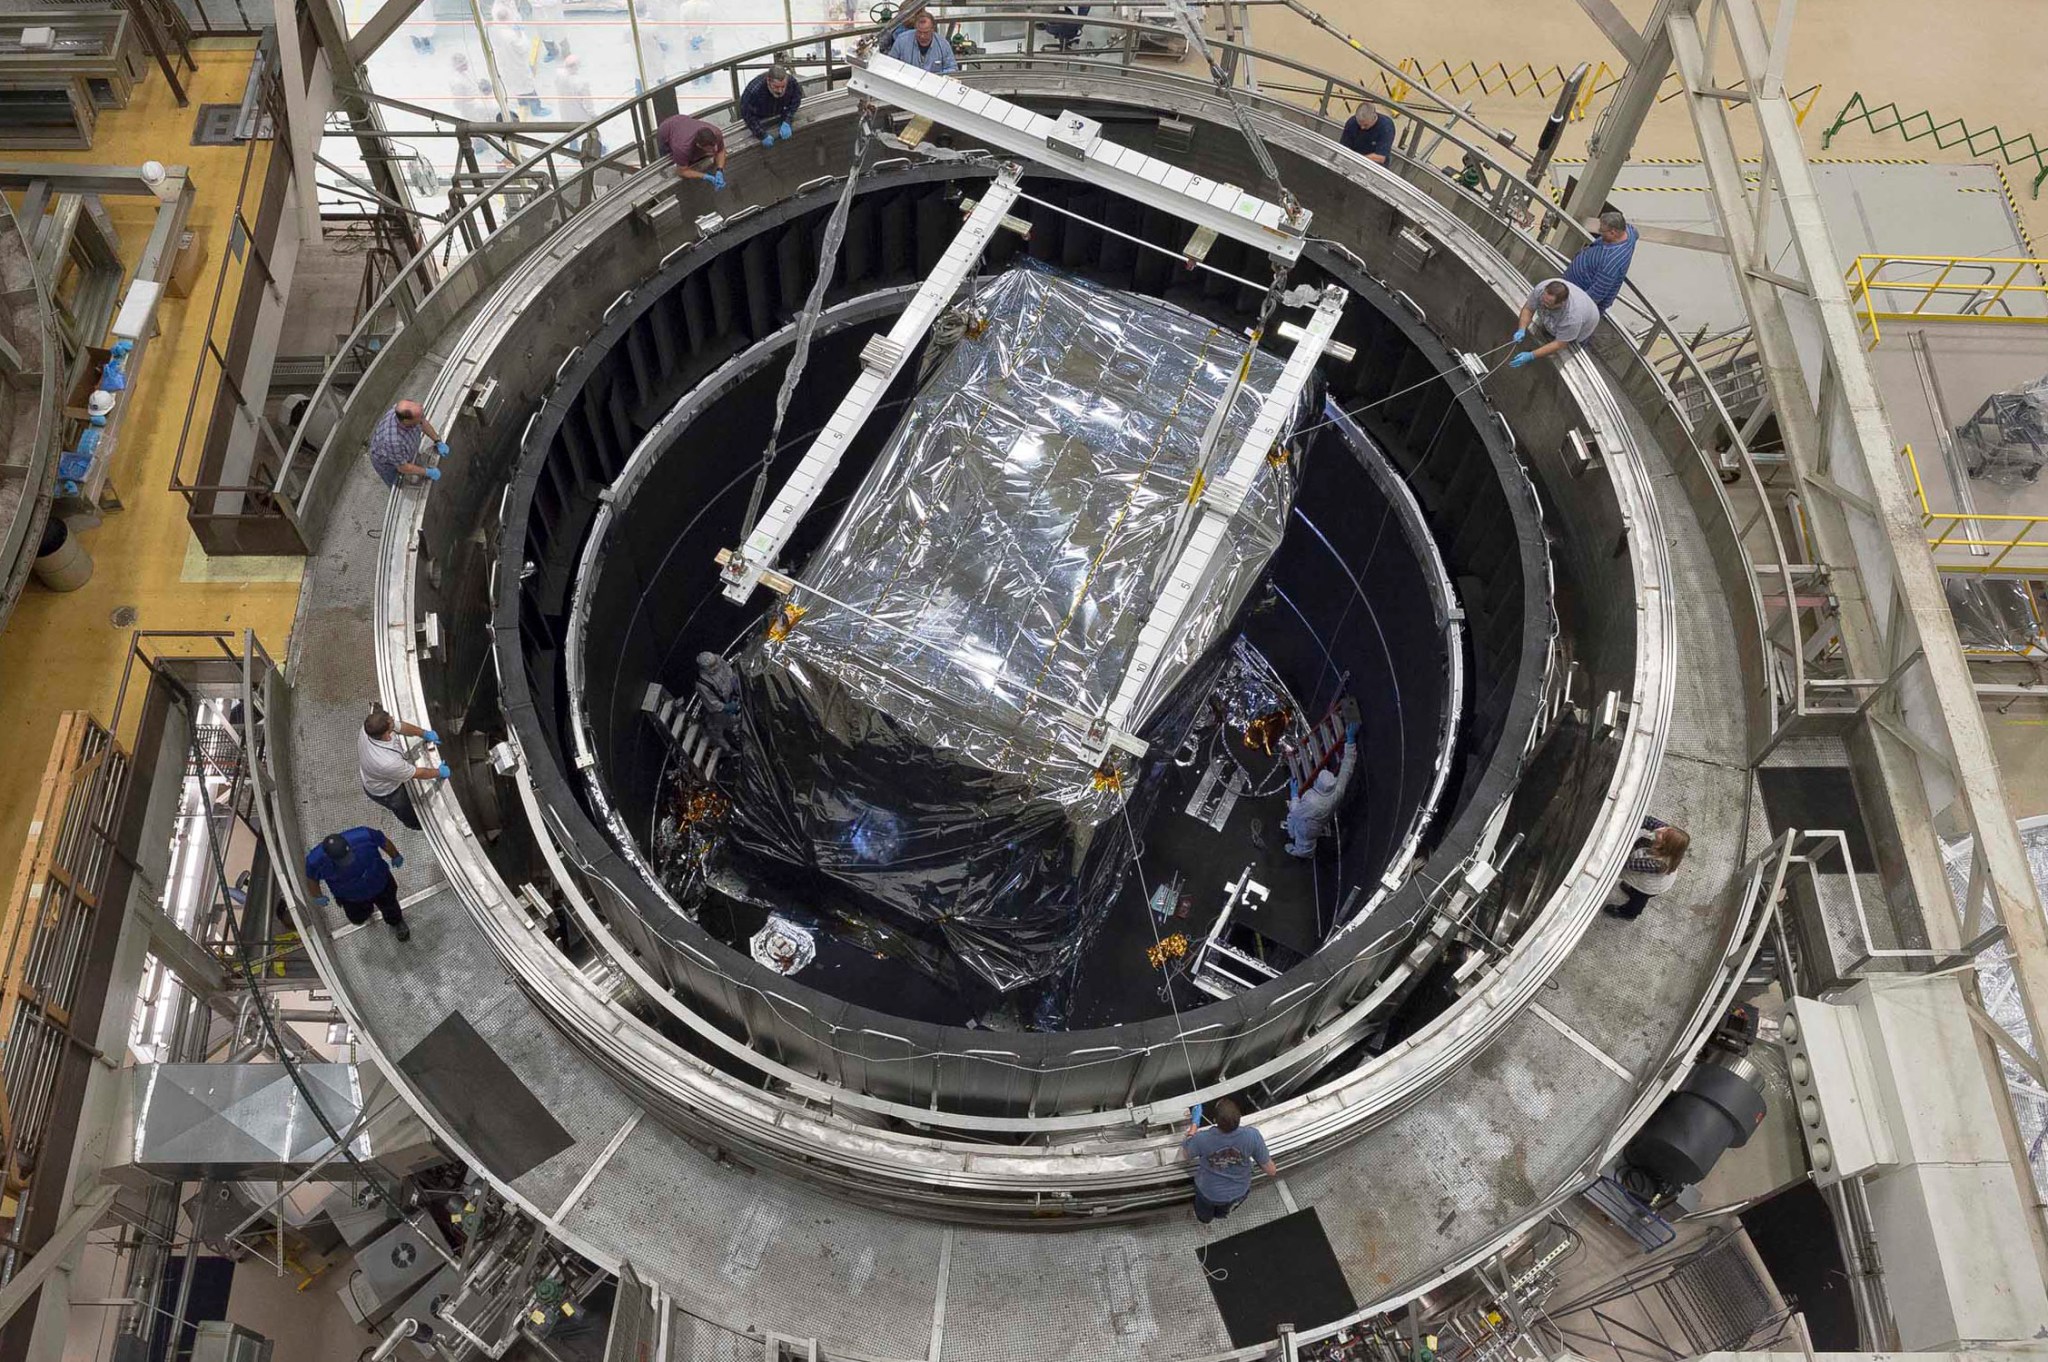 This rare overhead view of the thermal vacuum chamber at NASA's Goddard Space Flight Center in Greenbelt, Maryland.